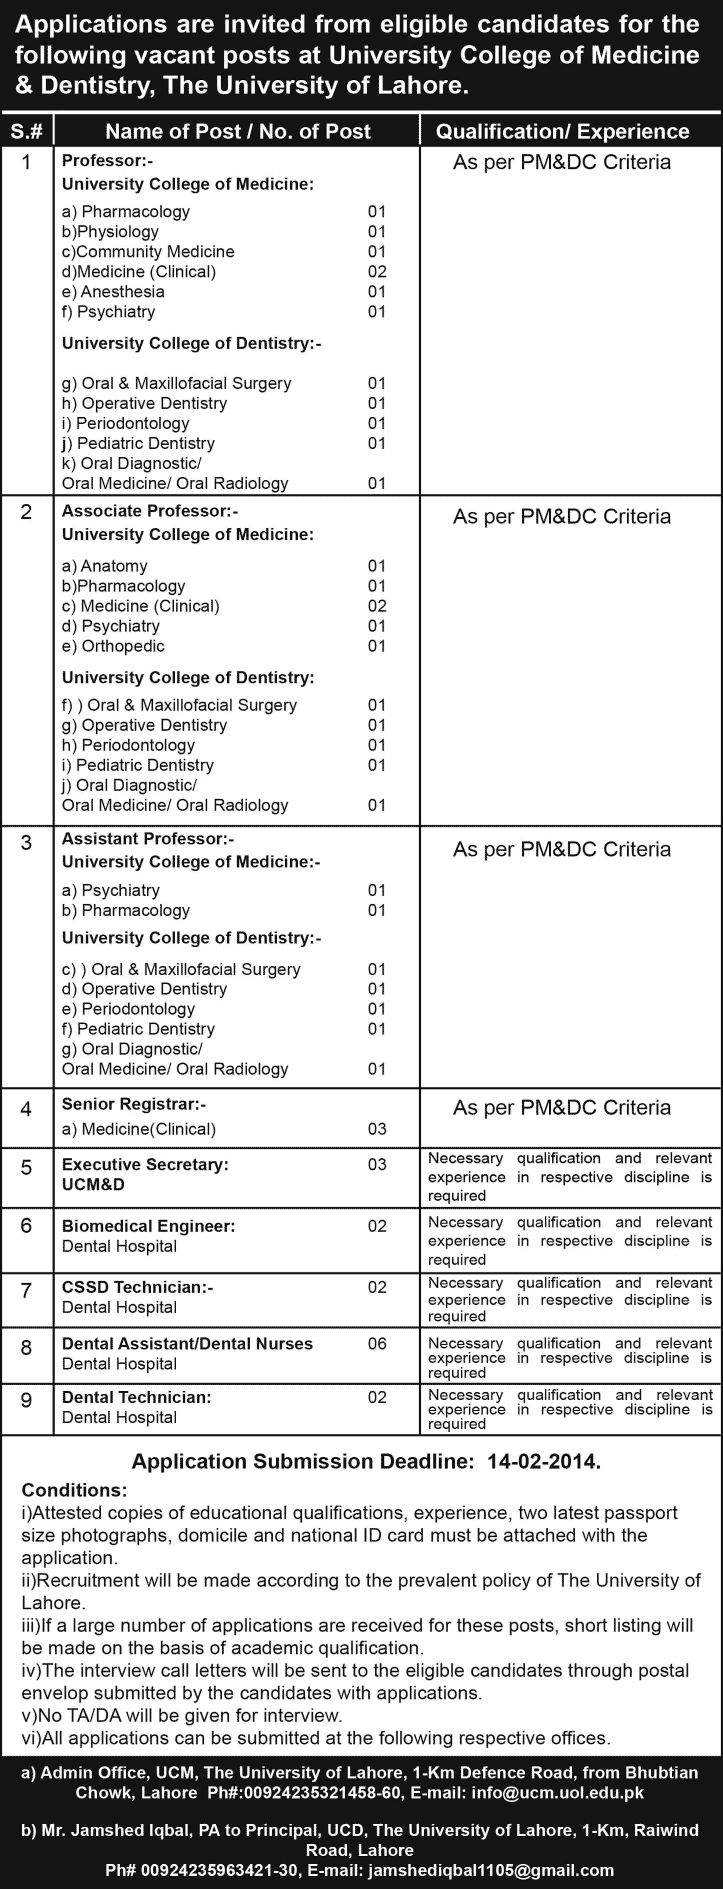 University College of Medicine & Dentistry Lahore Jobs 2014 February for Medical Faculty & Paramedical Staff